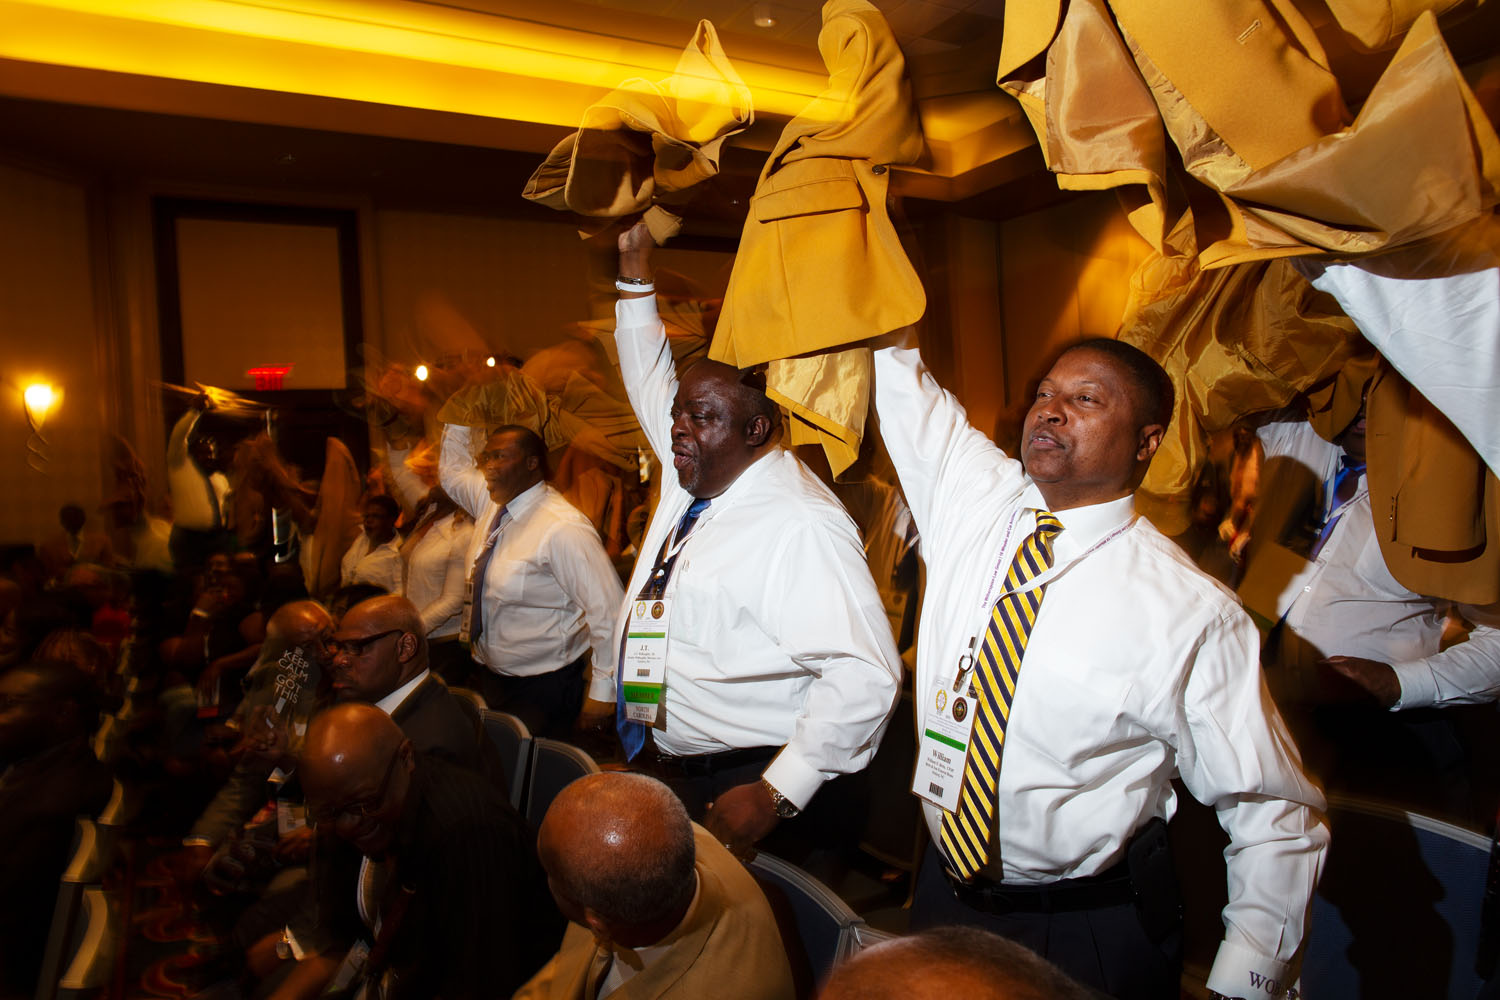 Members of the National Funeral Directors and Morticians Association from North Carolina wave their jackets and shout on cue when asked to show their spirit during NFDMA’s 82nd Annual National Convention and Exposition. Mobile, AL, August 2019.